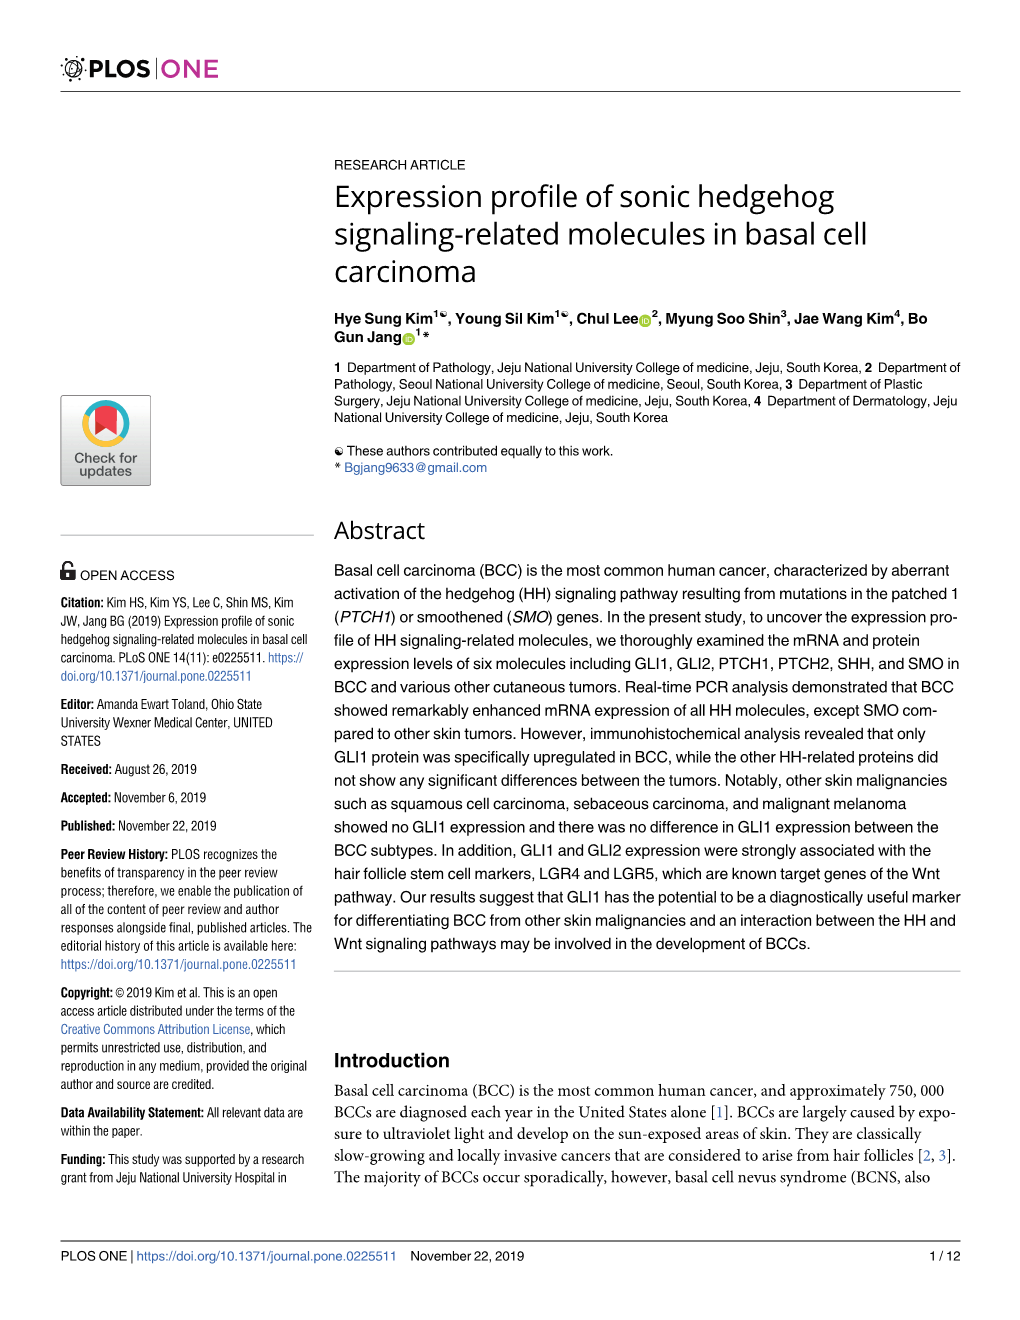 Expression Profile of Sonic Hedgehog Signaling-Related Molecules in Basal Cell Carcinoma